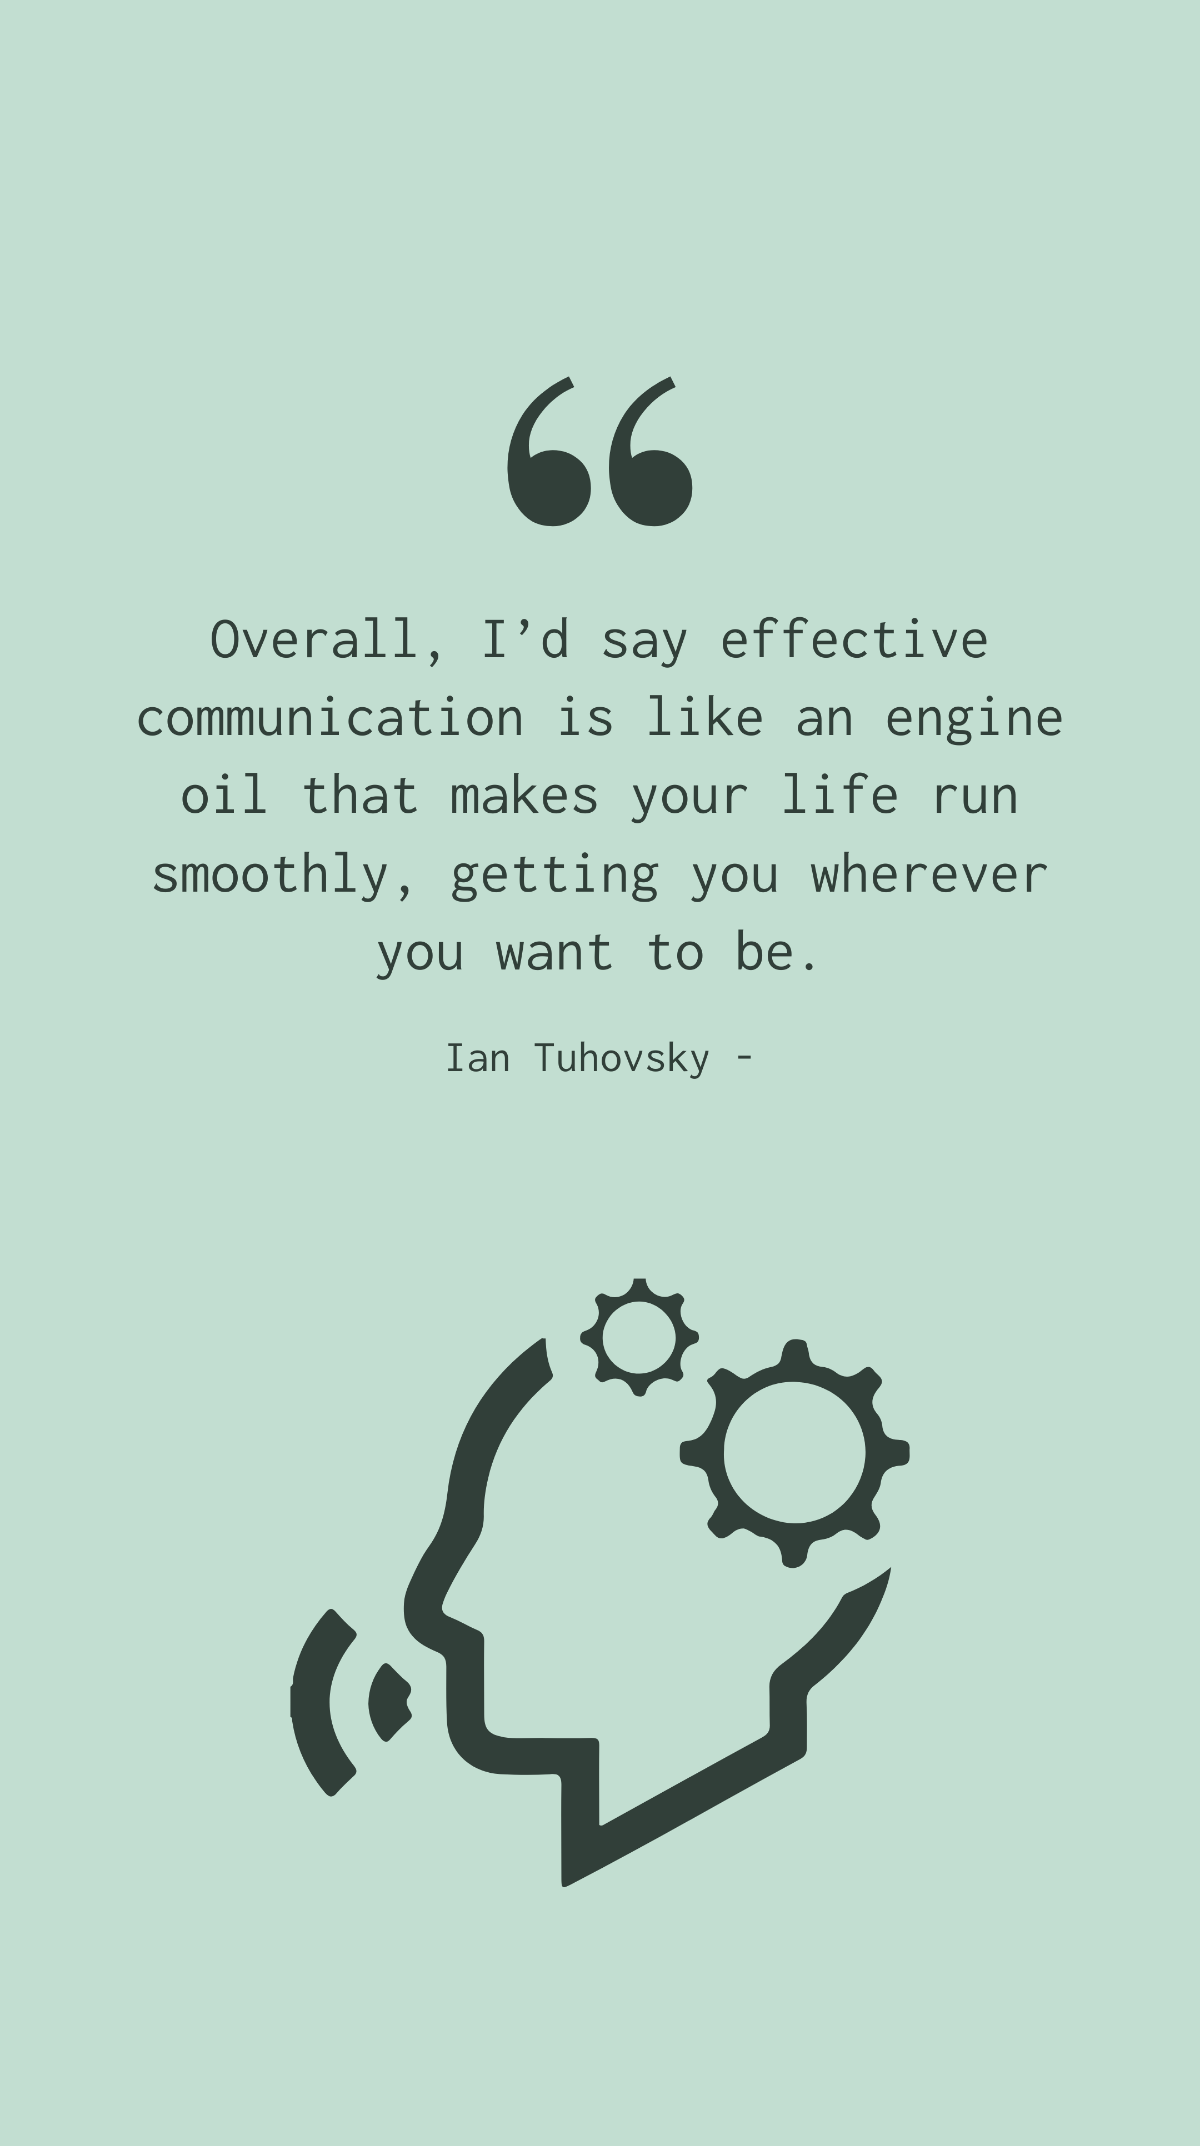 Free Ian Tuhovsky - Overall, I’d say effective communication is like an engine oil that makes your life run smoothly, getting you wherever you want to be. Template